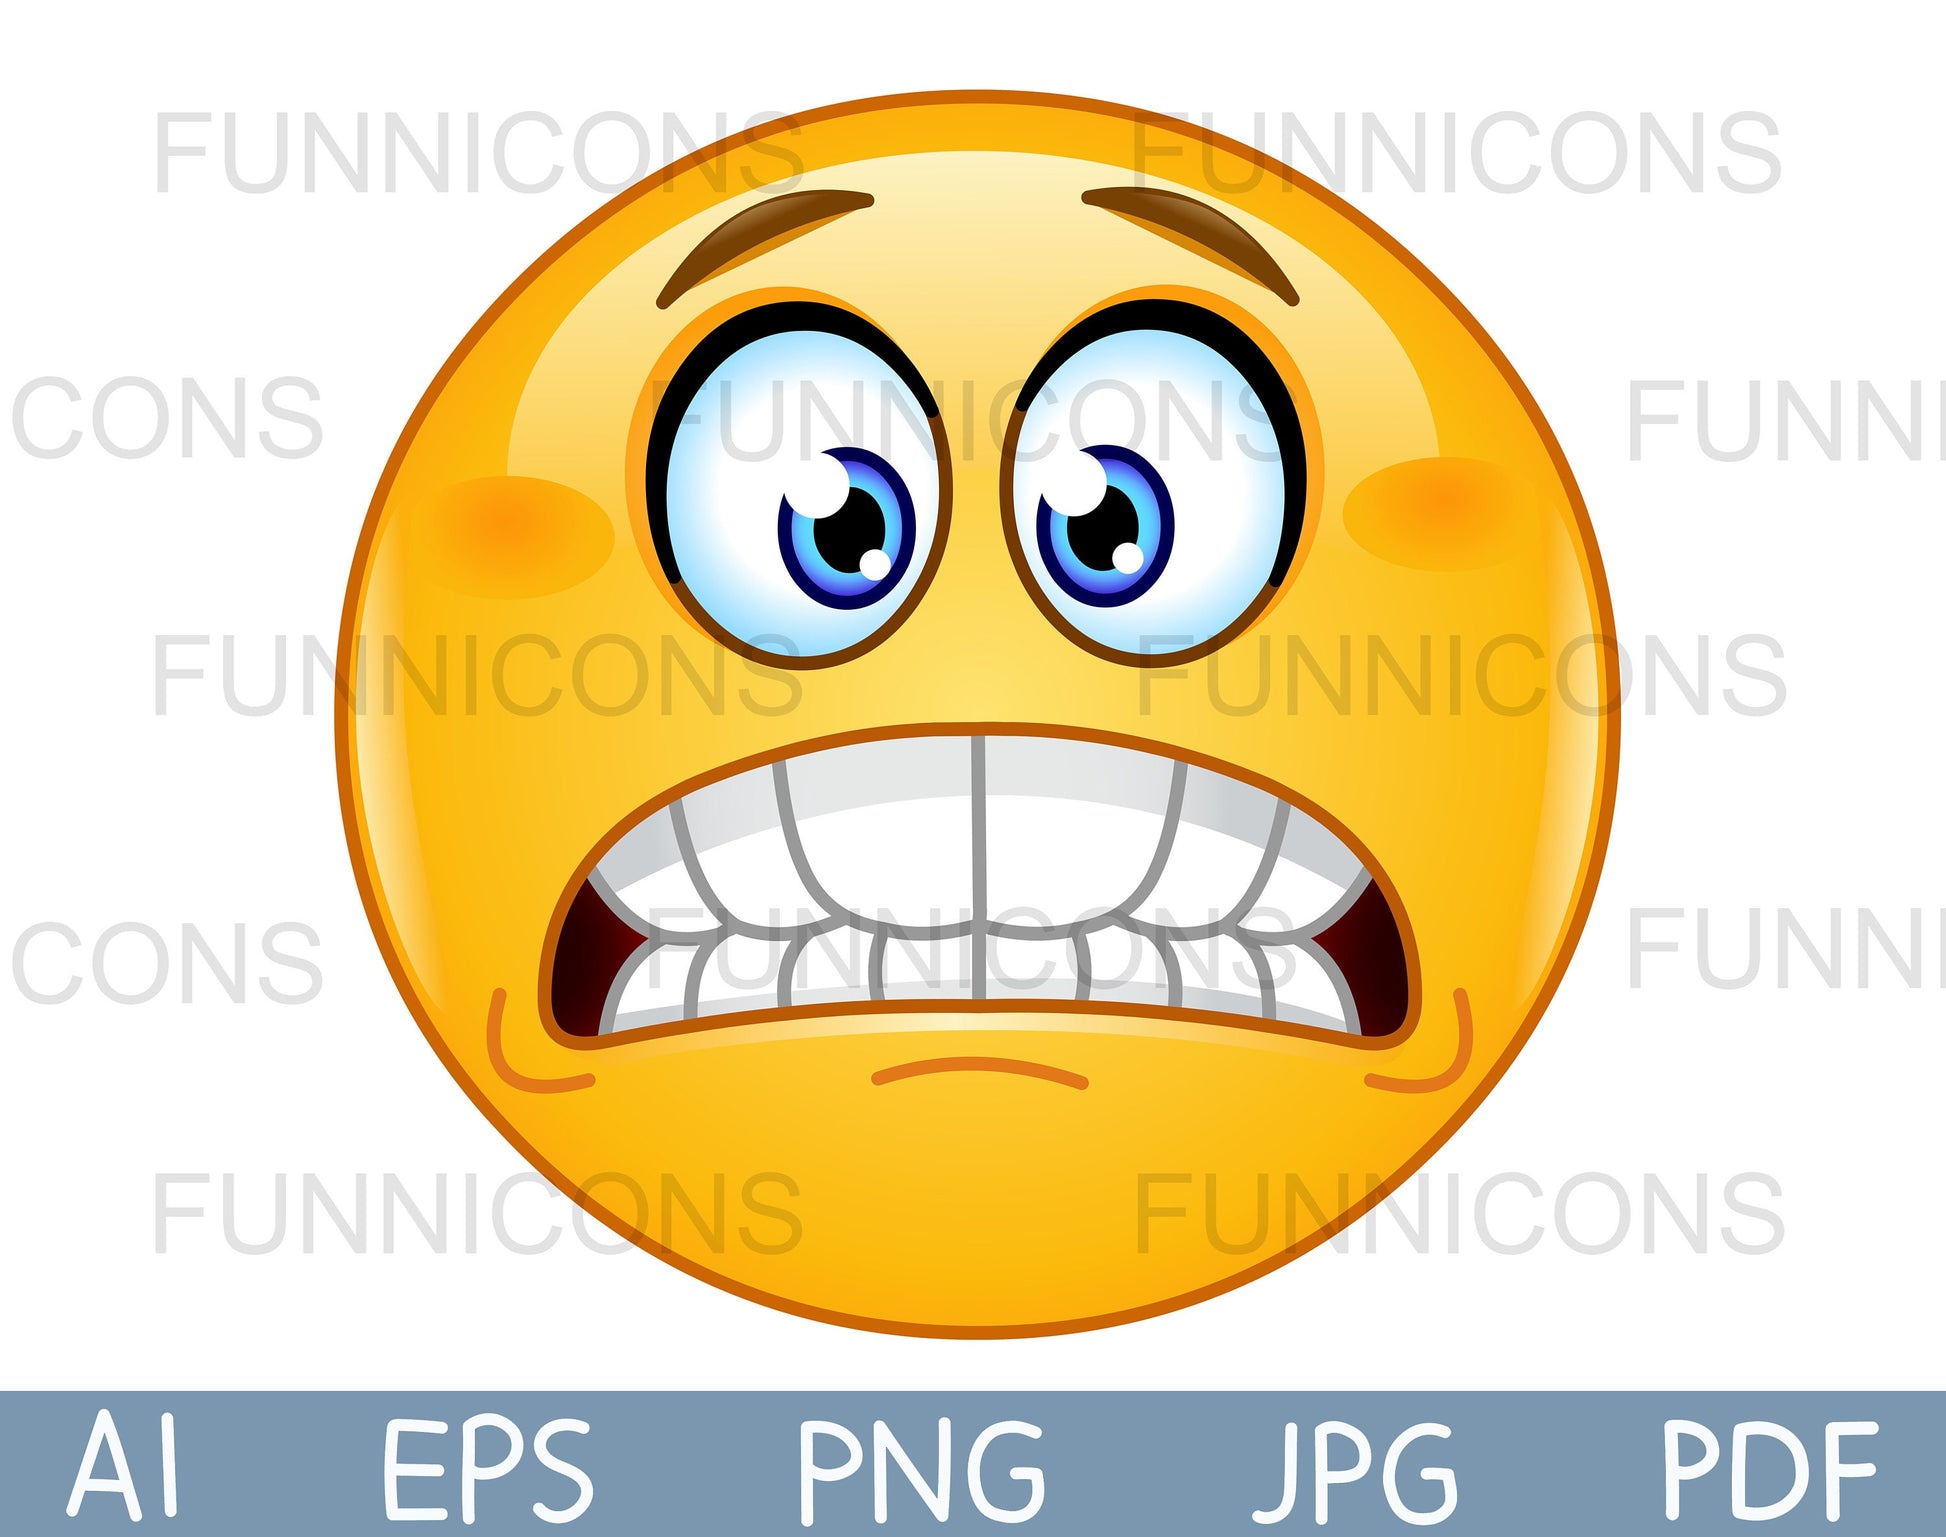 Scared Face, Scared, Expresson, Emoticon PNG and Vector with